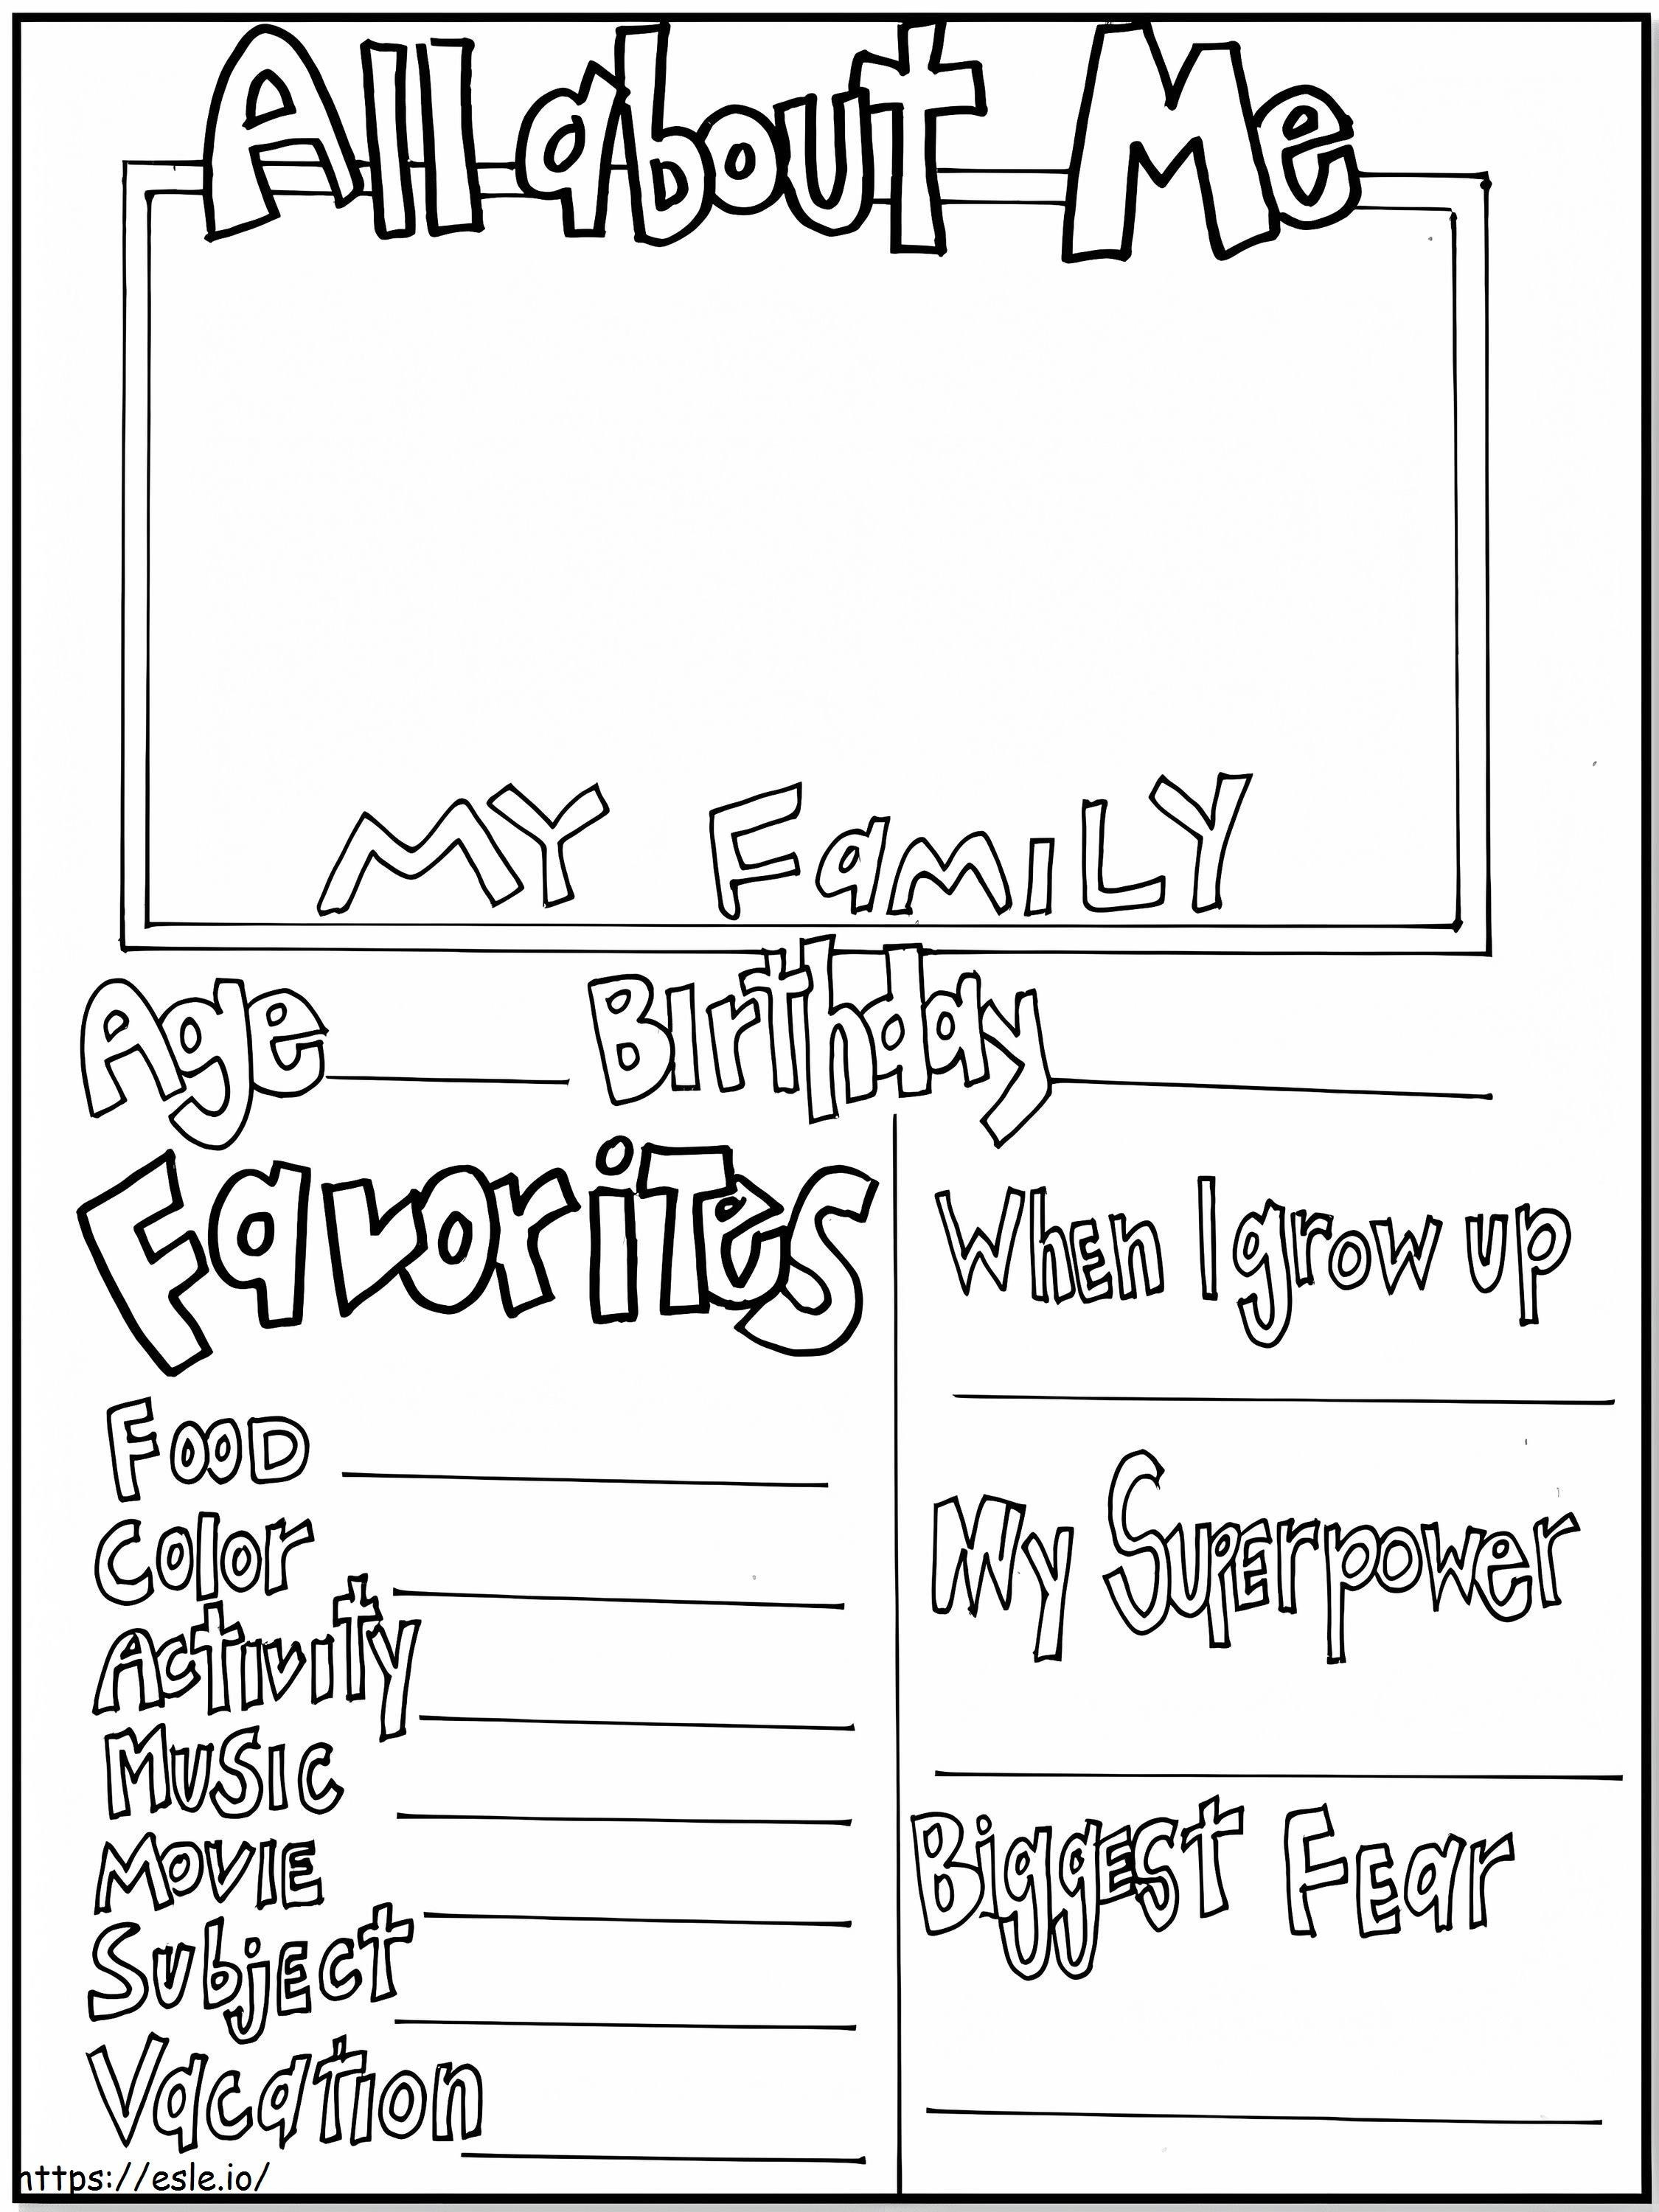 All About Me Free Printable coloring page